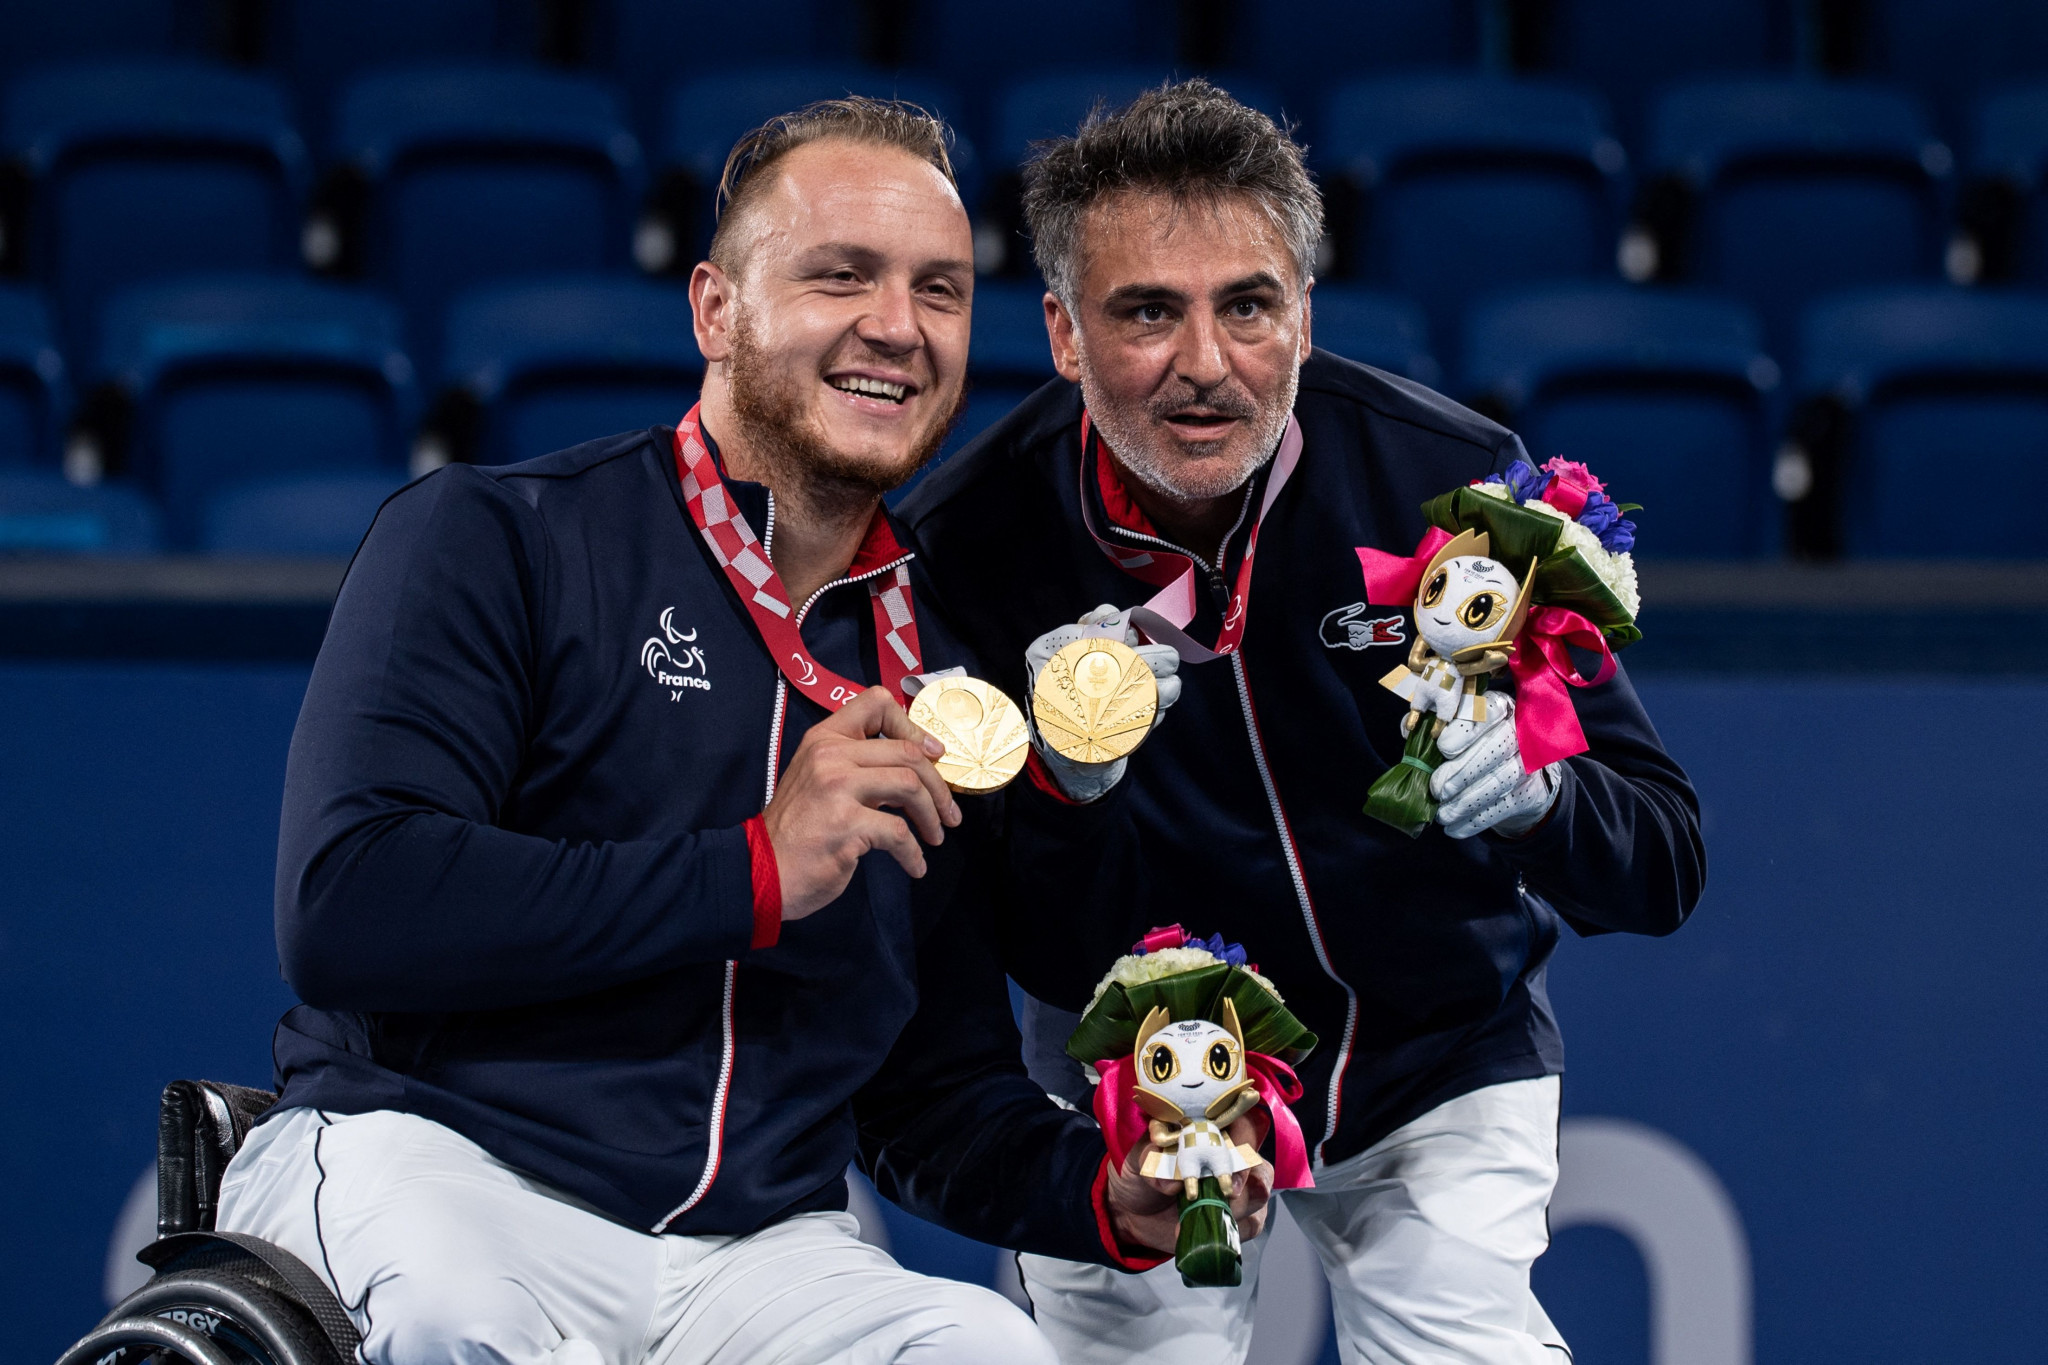 Stéphane Houdet, right, won Paralympic gold with Nicolas Peifer, left, in Tokyo ©Getty Images